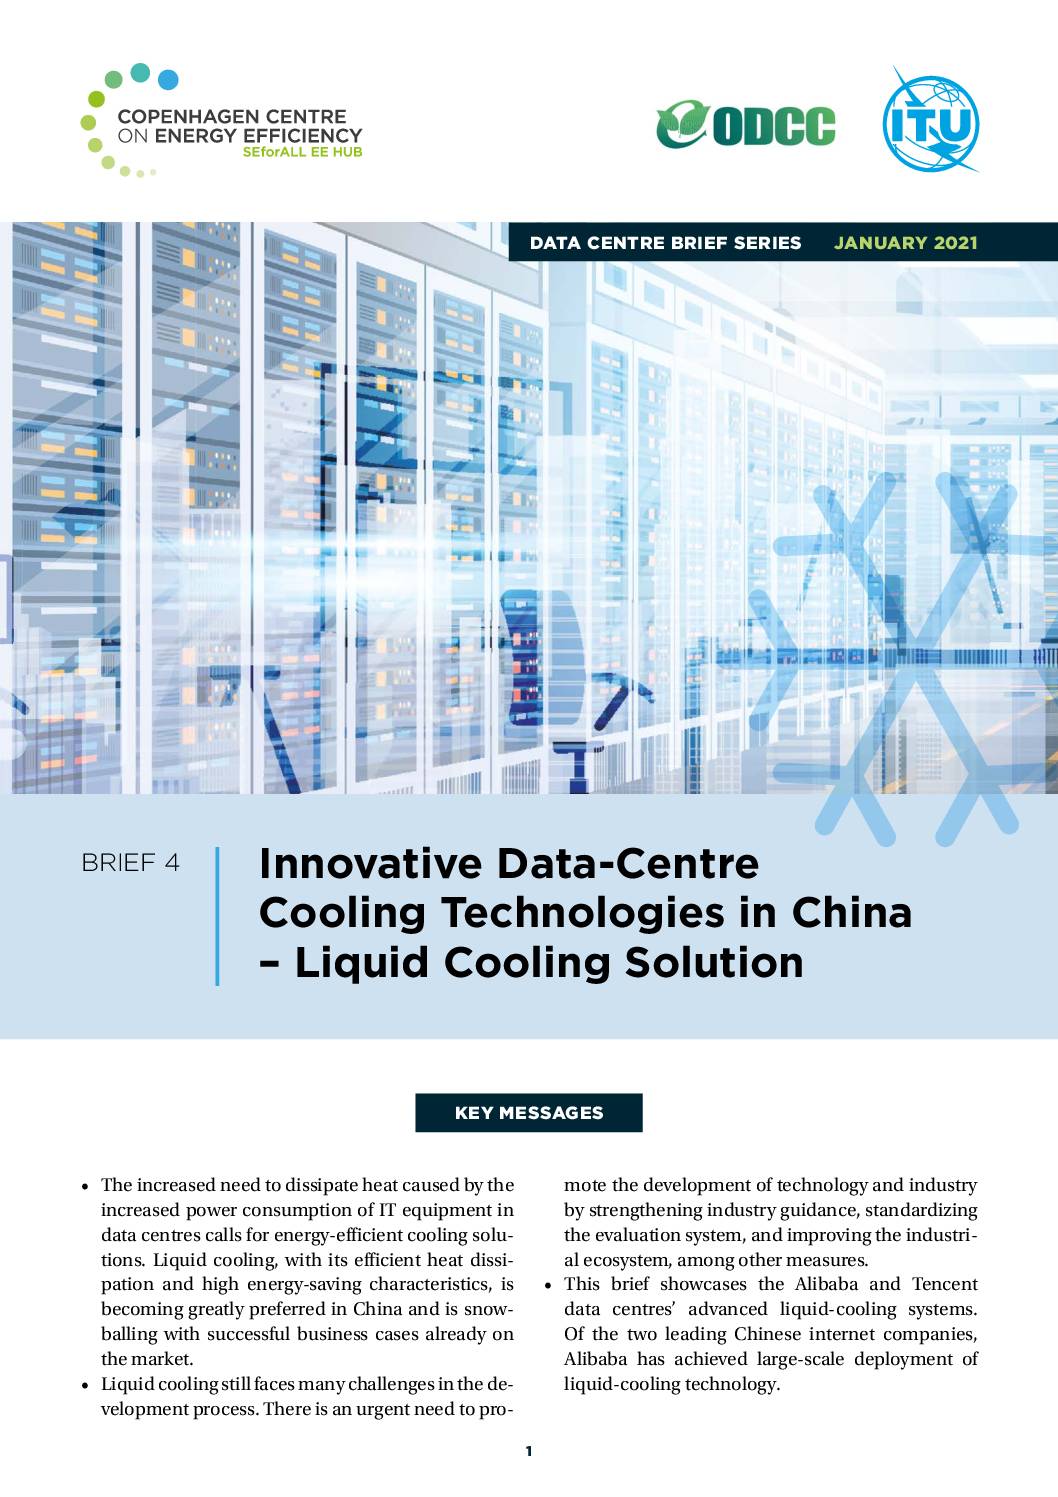 Innovative Data-Centre Cooling Technologies in China – Liquid Cooling Solution